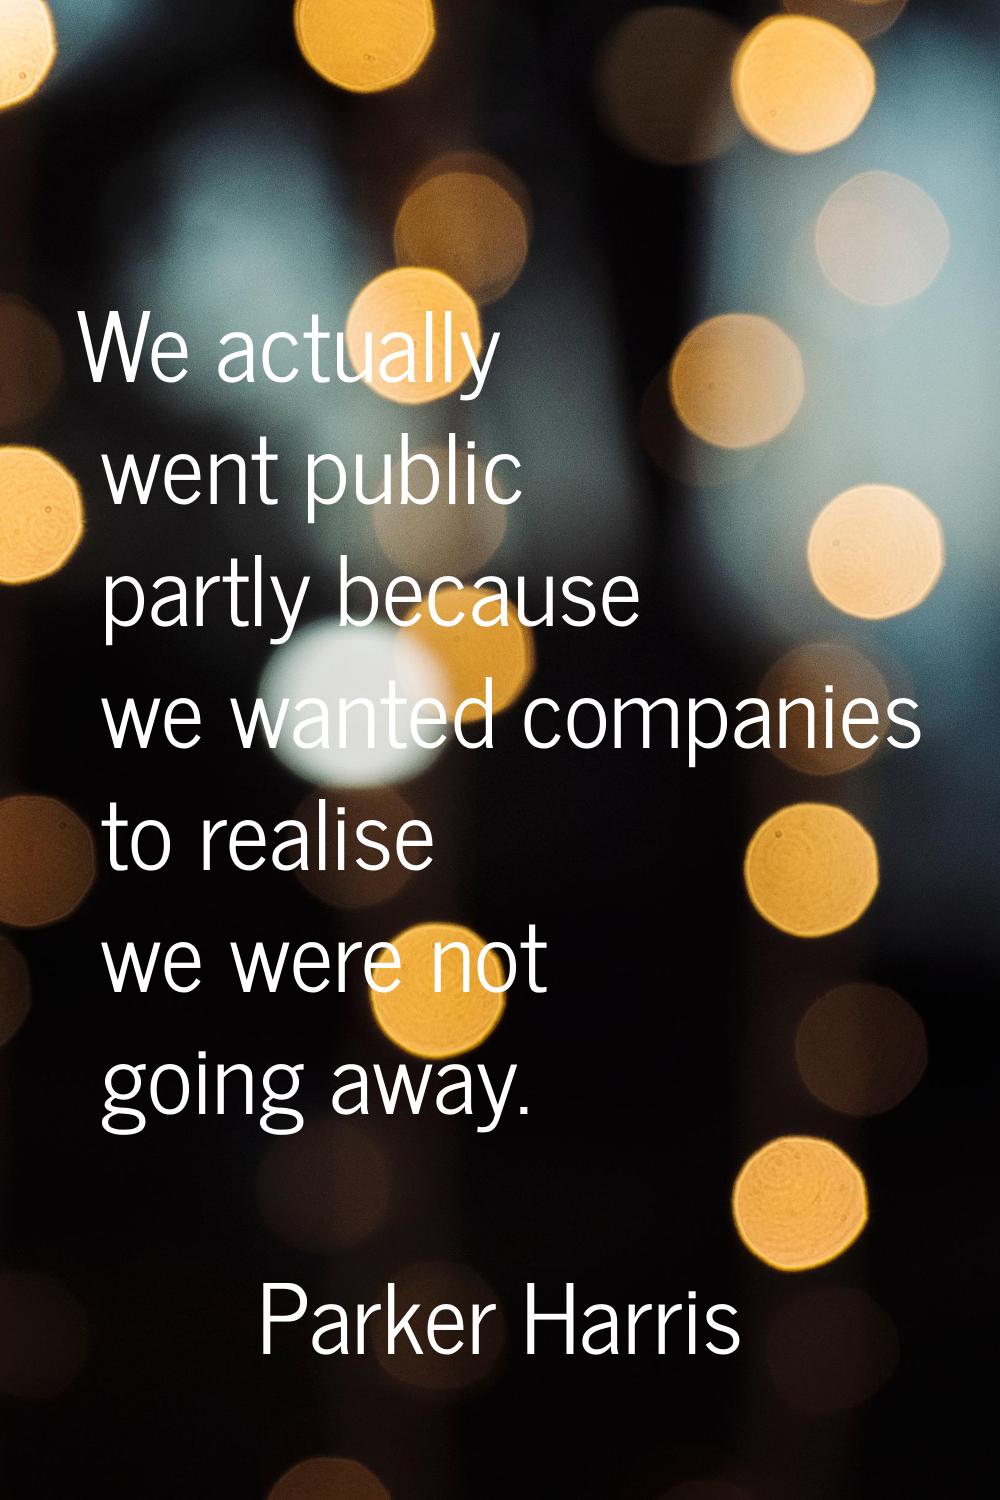 We actually went public partly because we wanted companies to realise we were not going away.